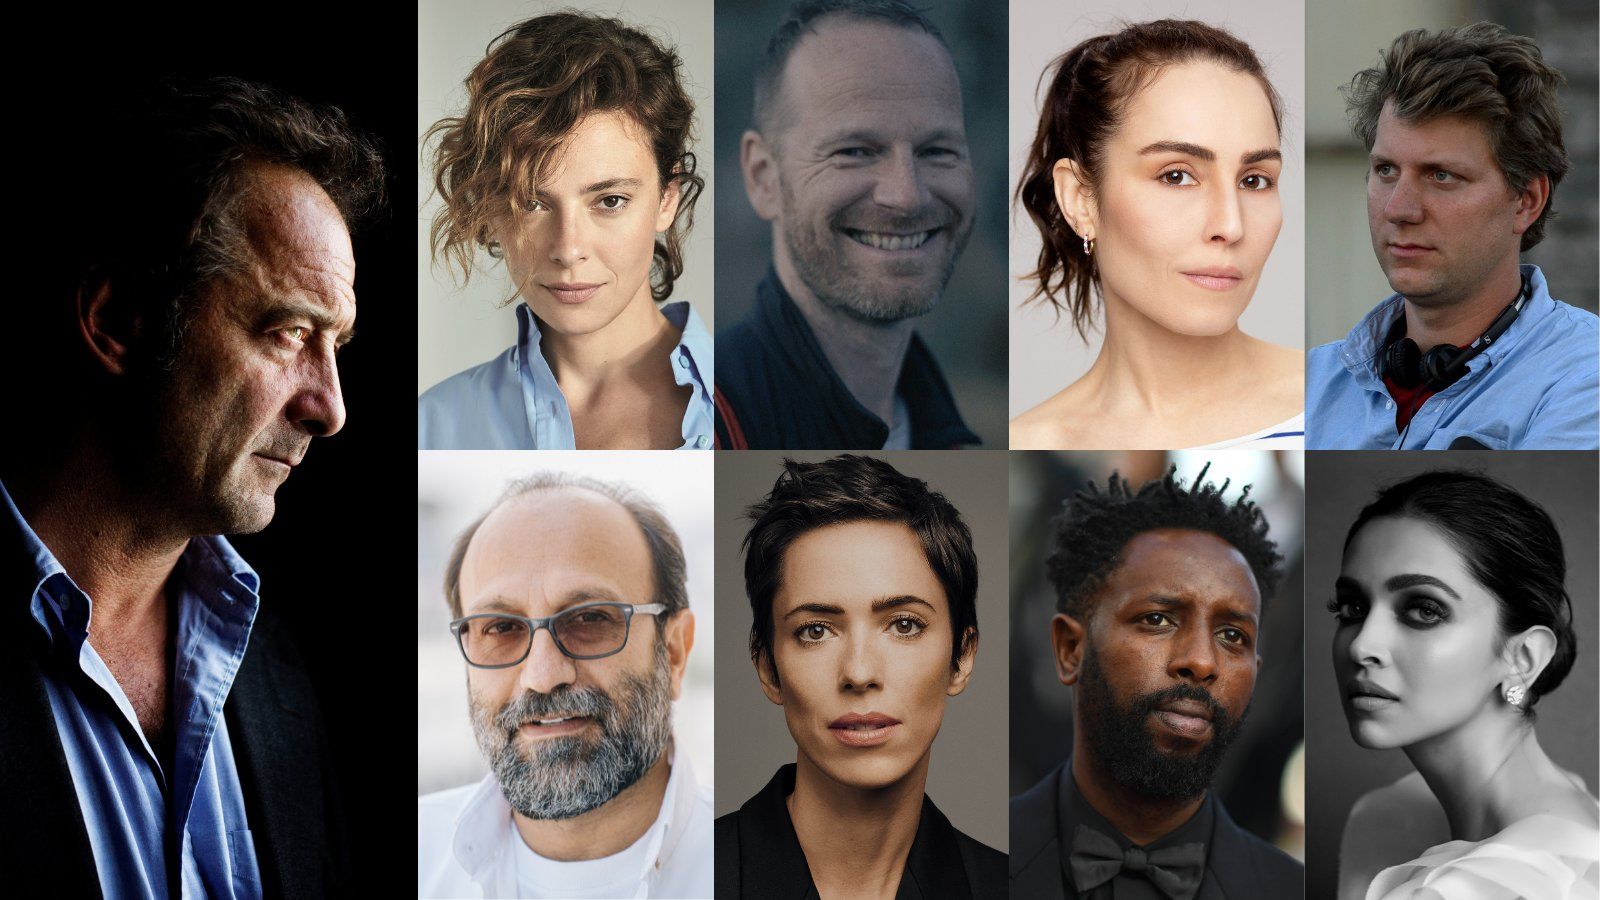 Cannes 2022: Who are the jury members?